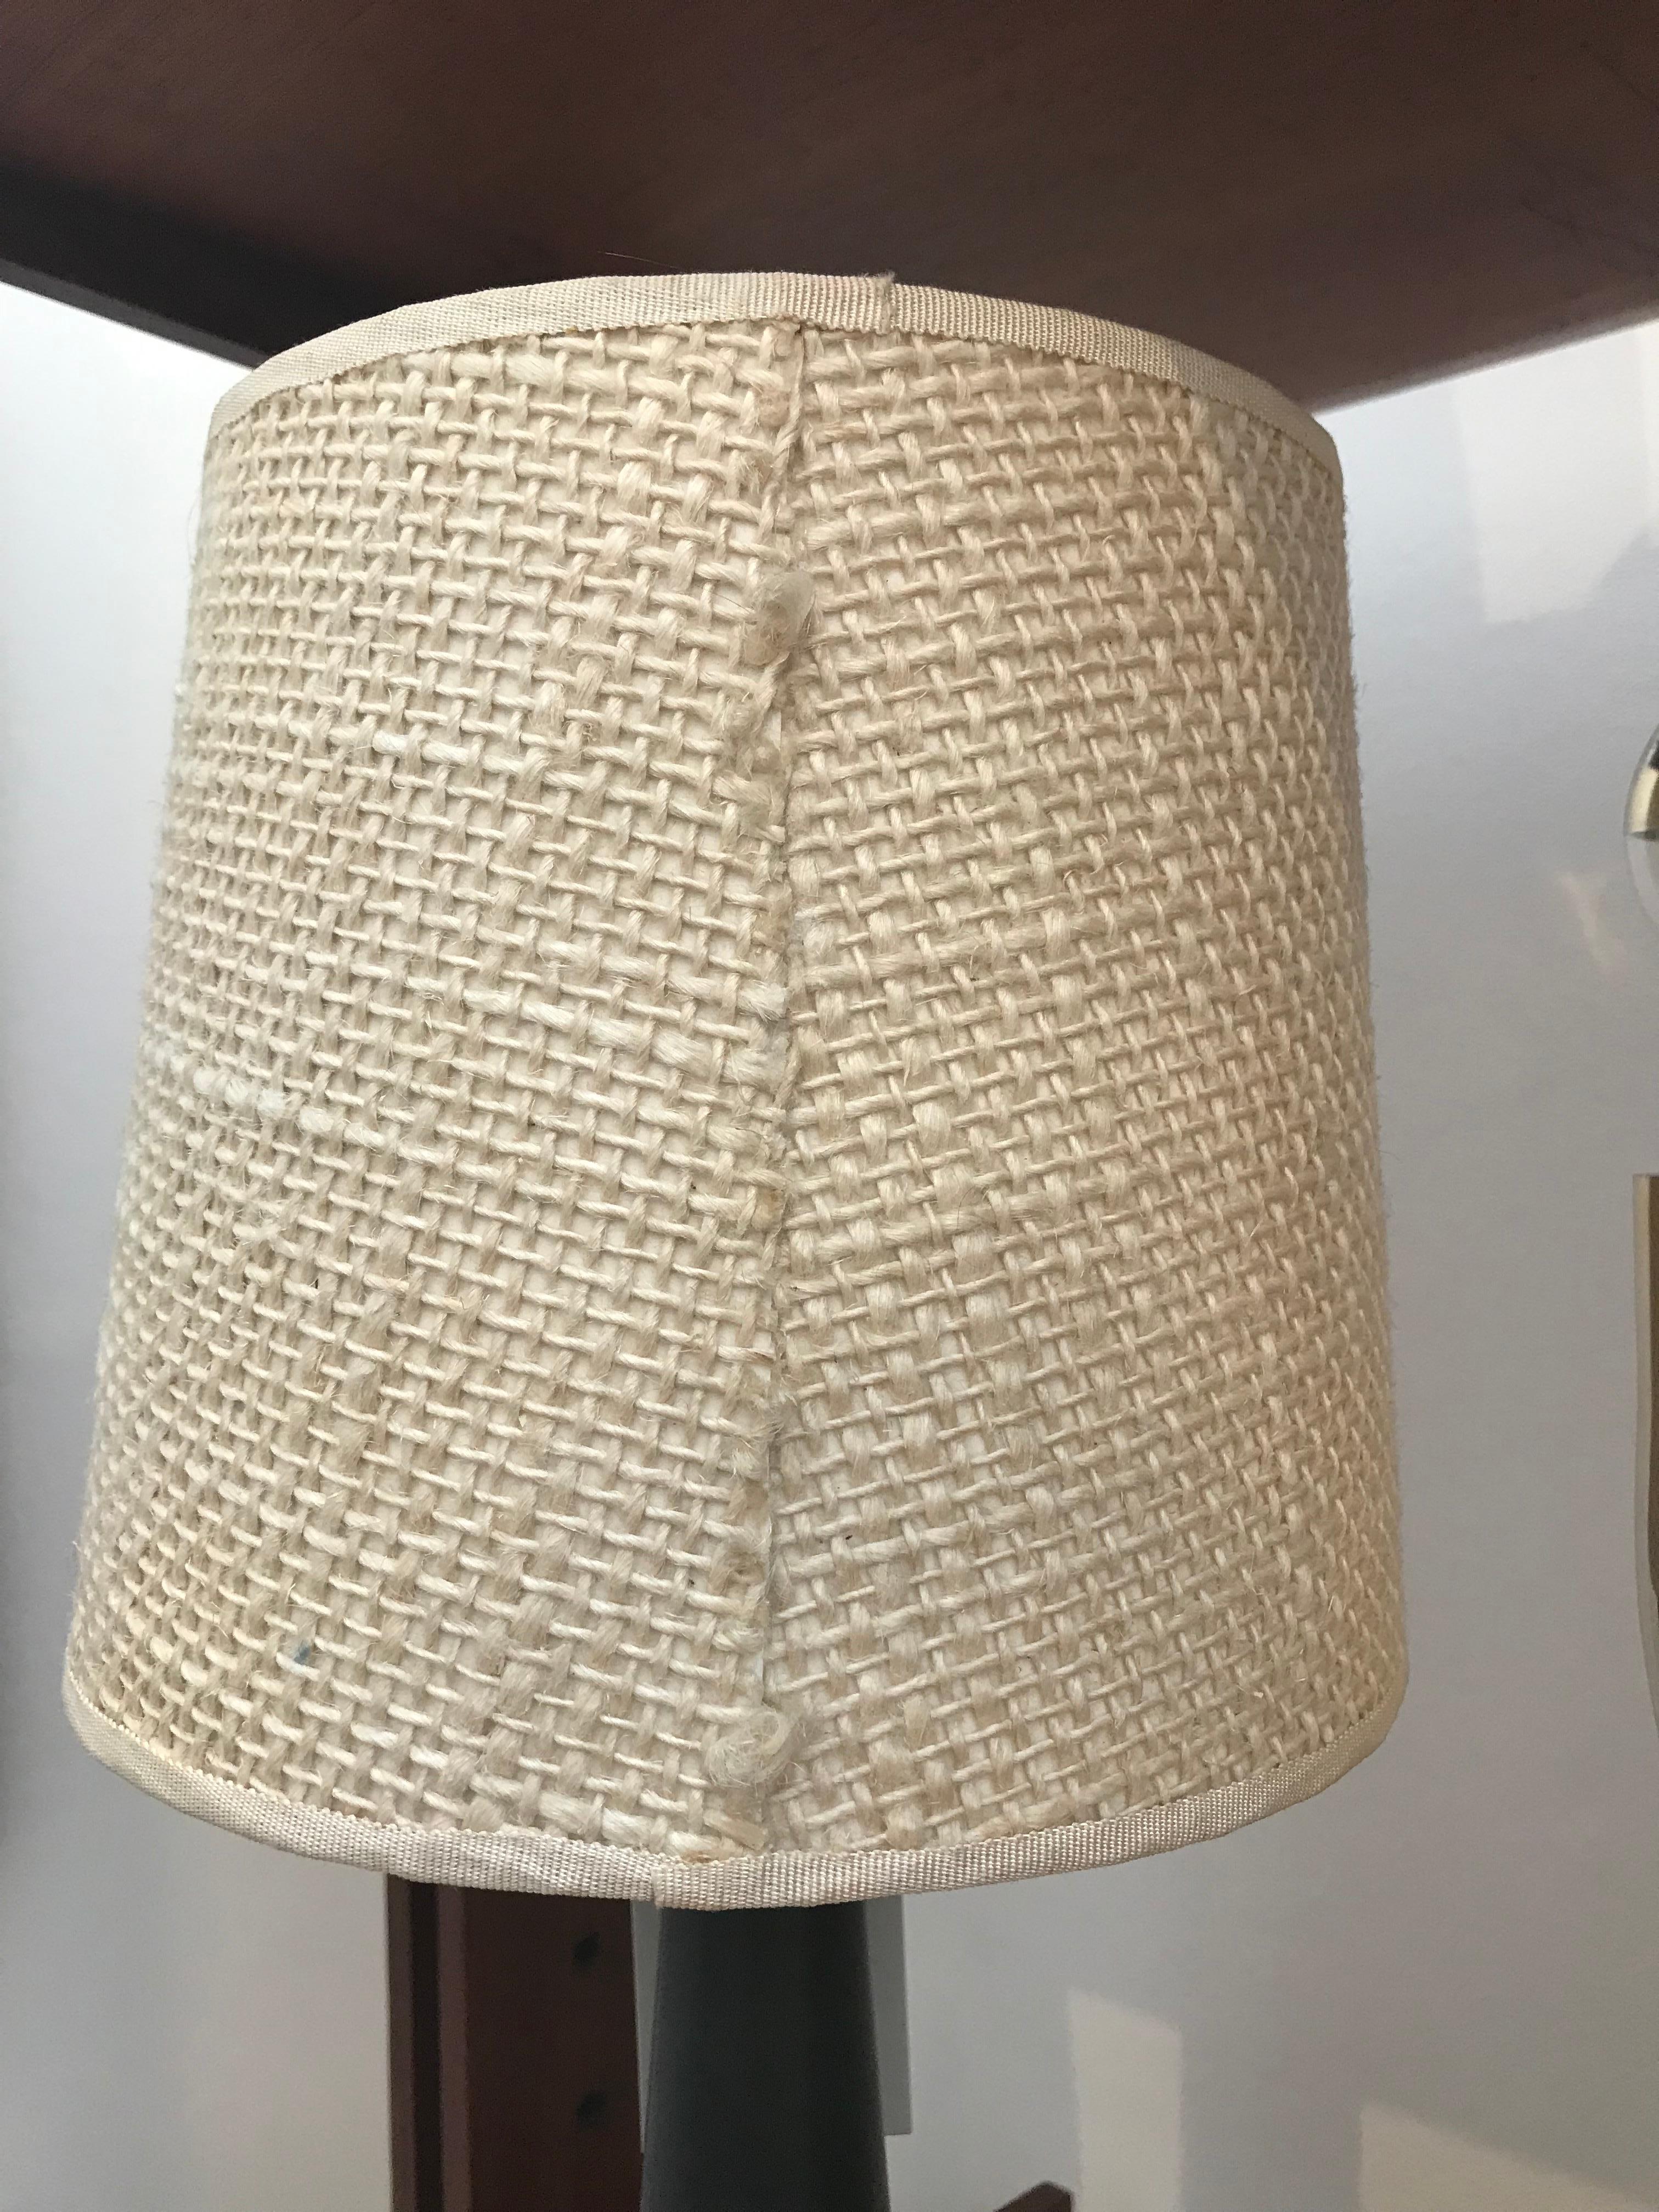 Swedish Carl Harry Stalhane Table Lamp with Hare's Fur Glaze and Woven Shade, circa 1955 For Sale